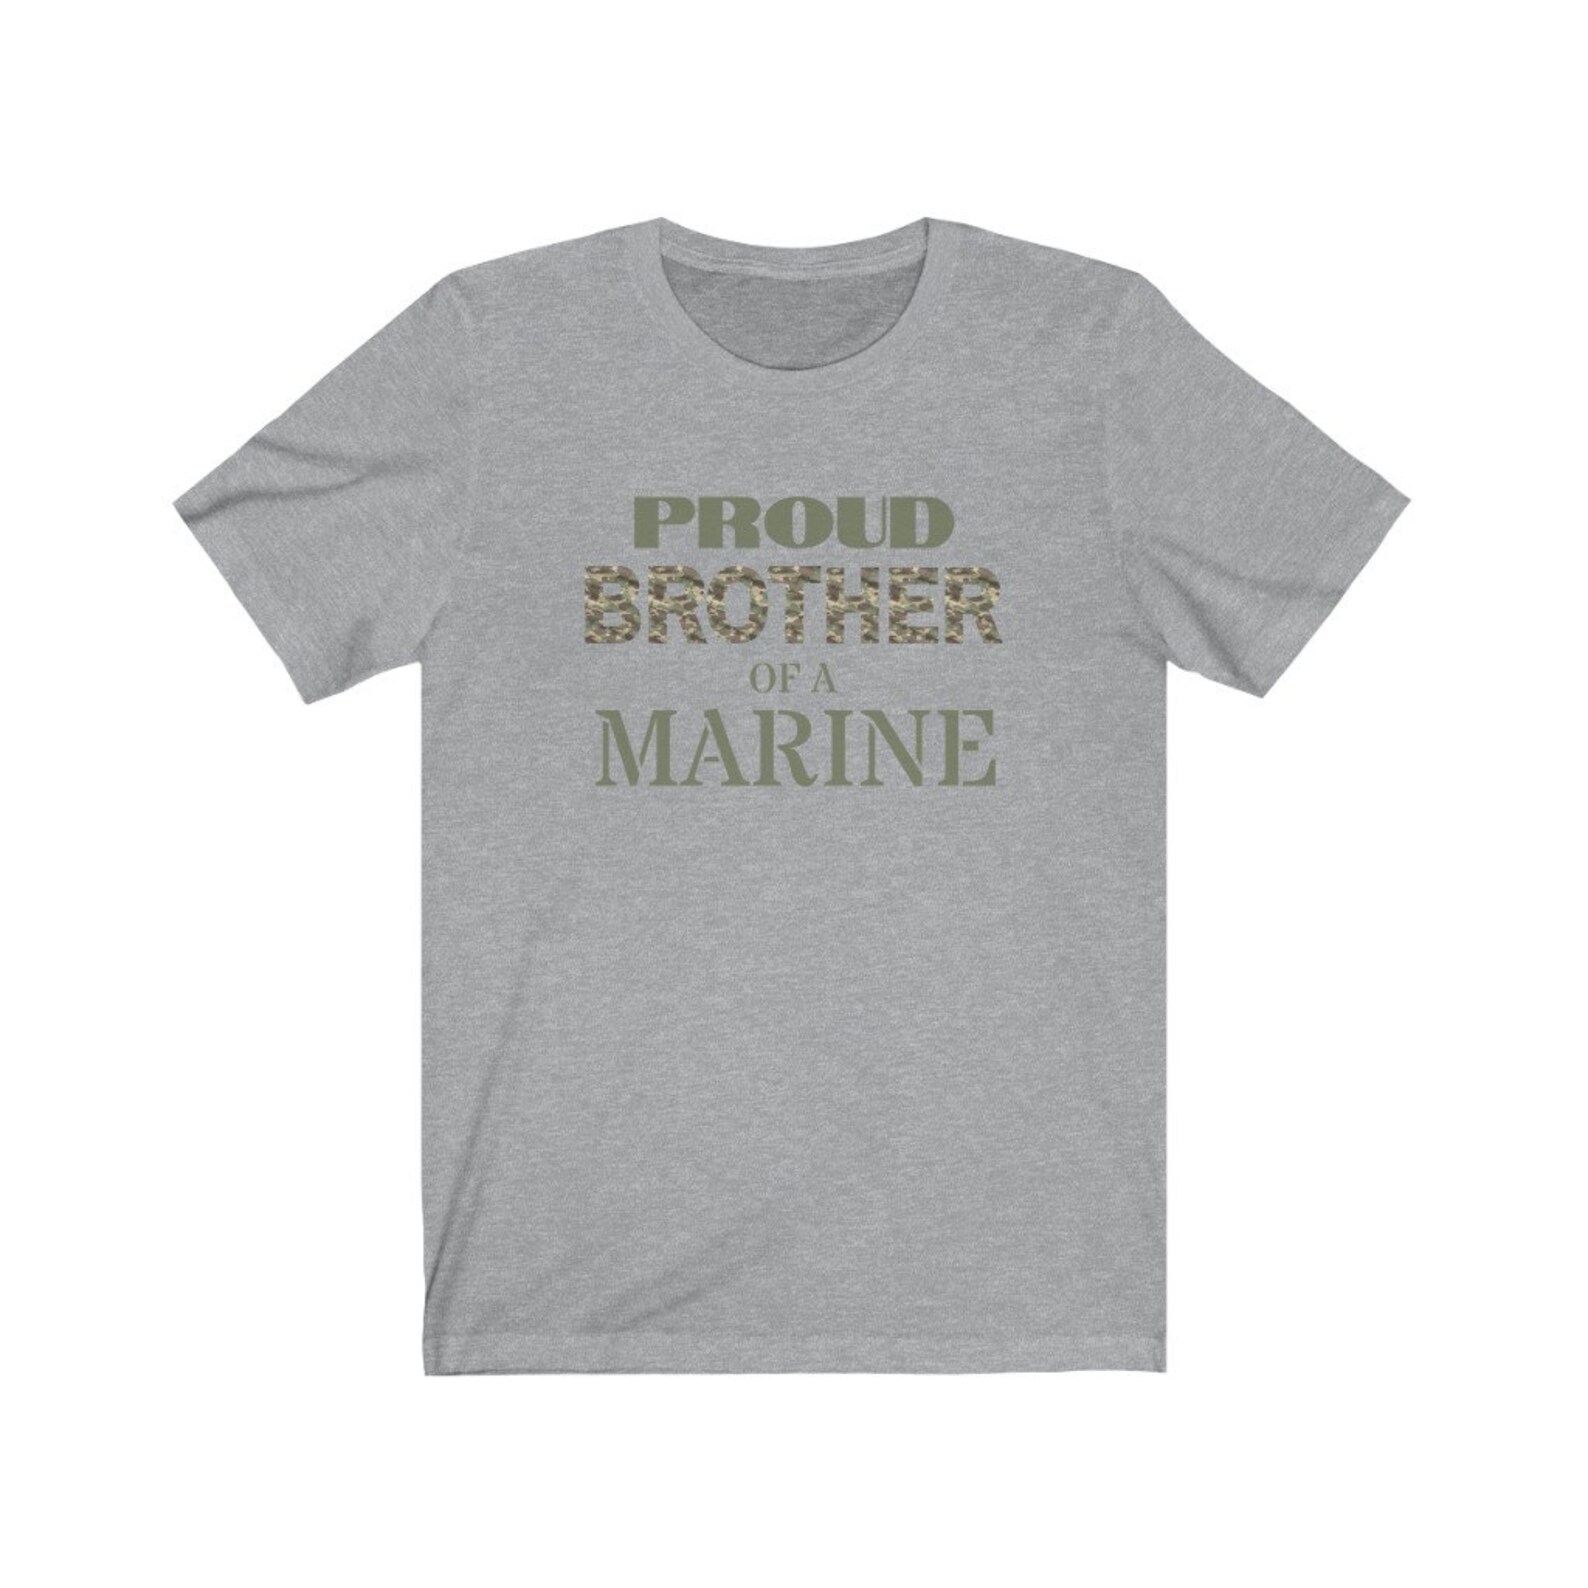 Proud Brother of a Marine Unisex T-shirt Marine Corps Brother | Etsy